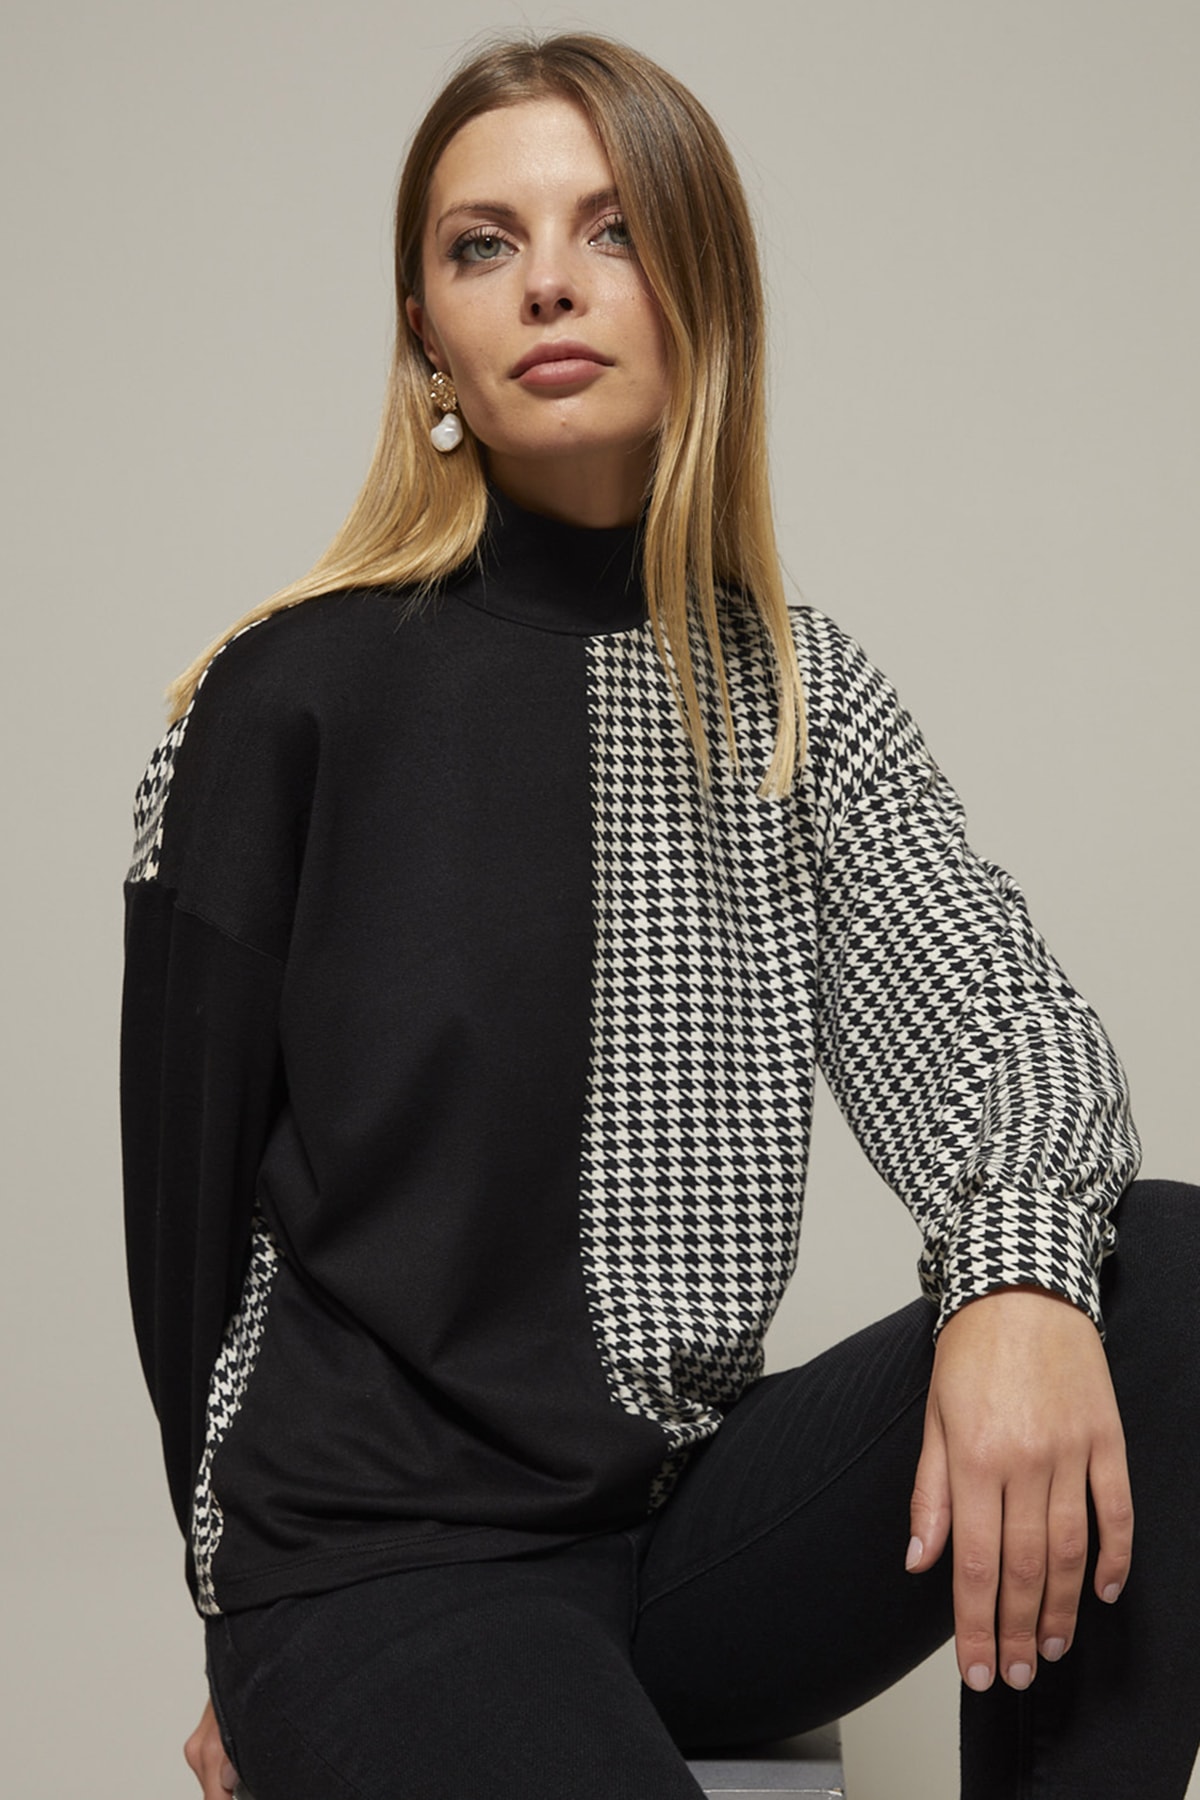 Cool & Sexy Women's Black and White Half Turtleneck Houndstooth Pattern Blouse